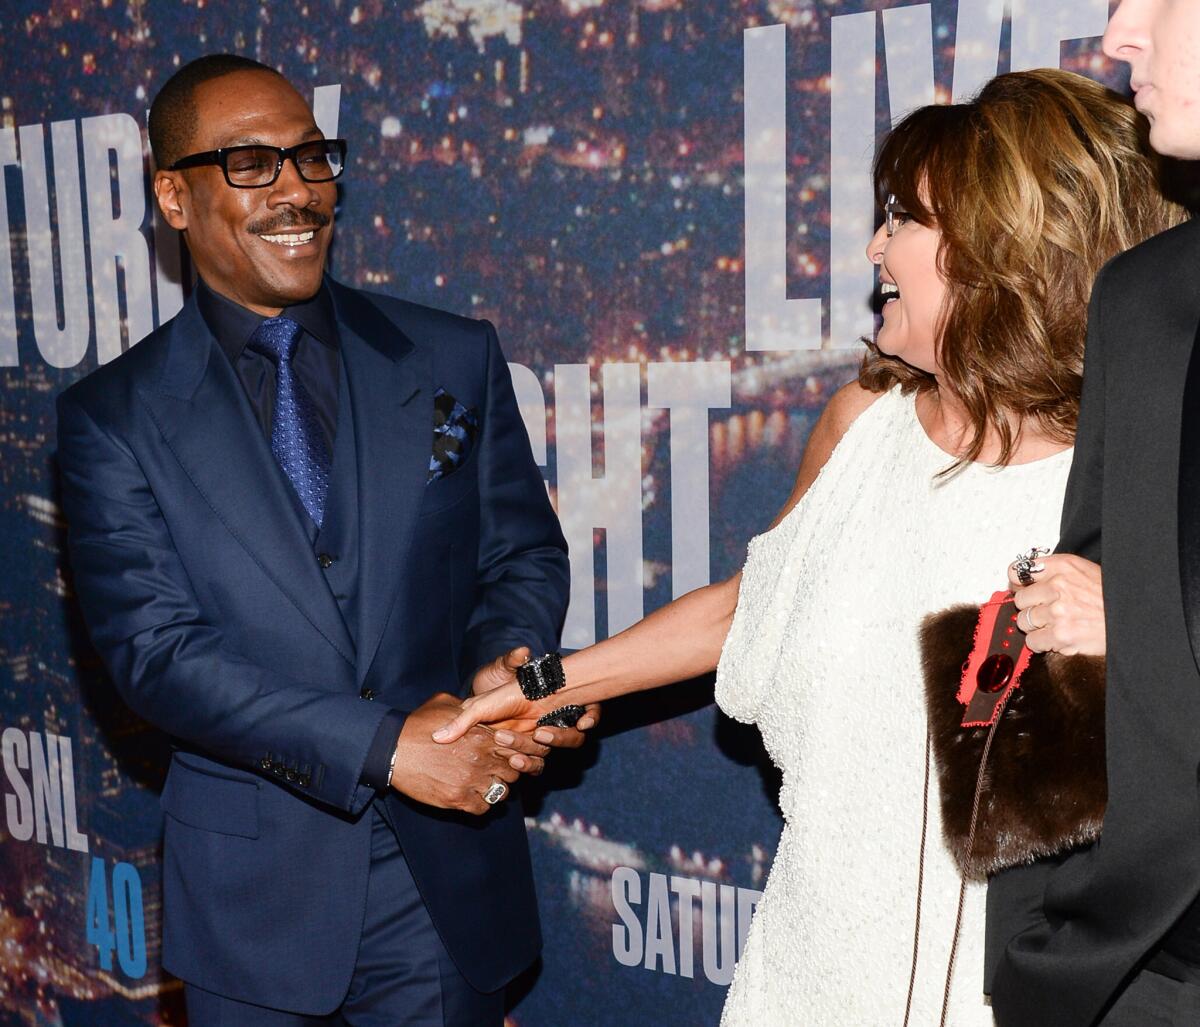 Actor Eddie Murphy greets former Alaska Gov. Sarah Palin on the "Saturday Night Live 40th Anniversary Special" red carpet on February 15, 2015. Murphy and Palin have no children together.